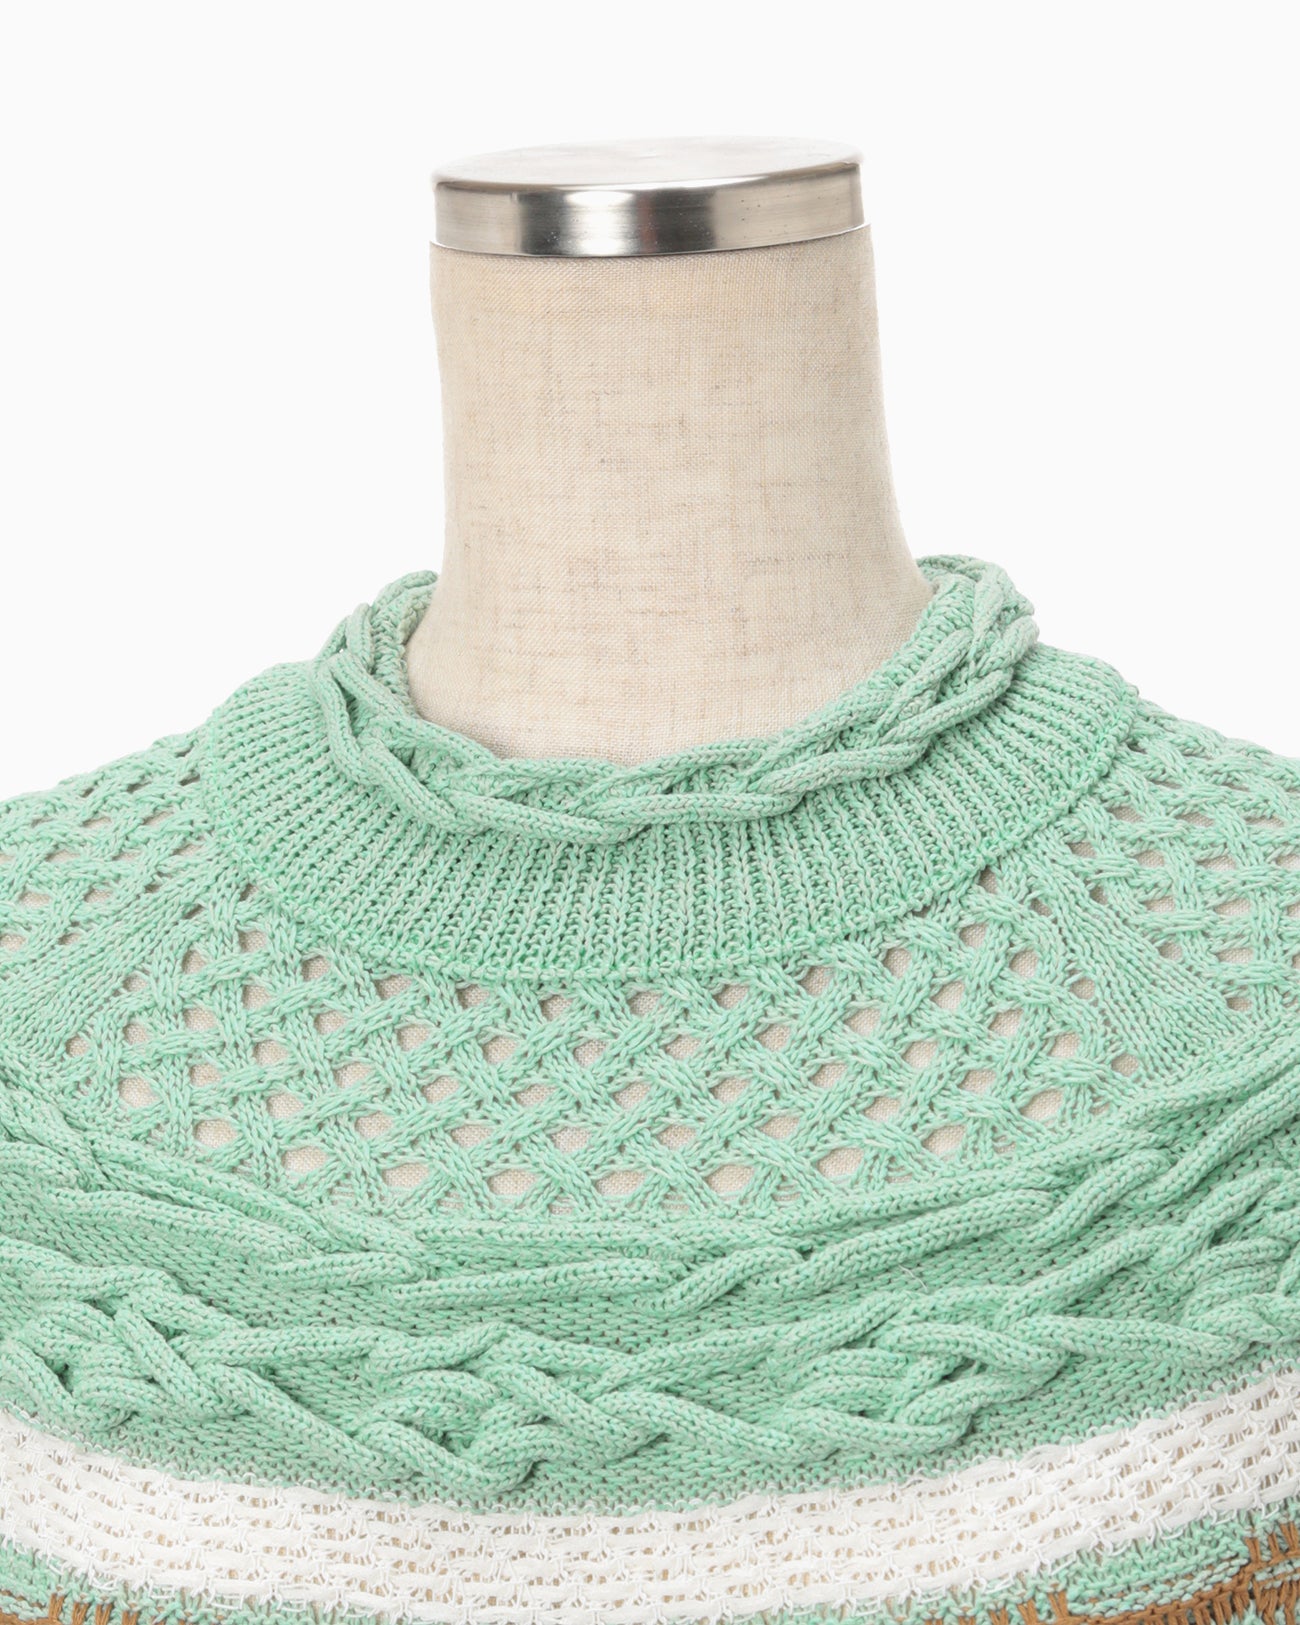 Bamboo Basket Pattern Knitted Top - mint green